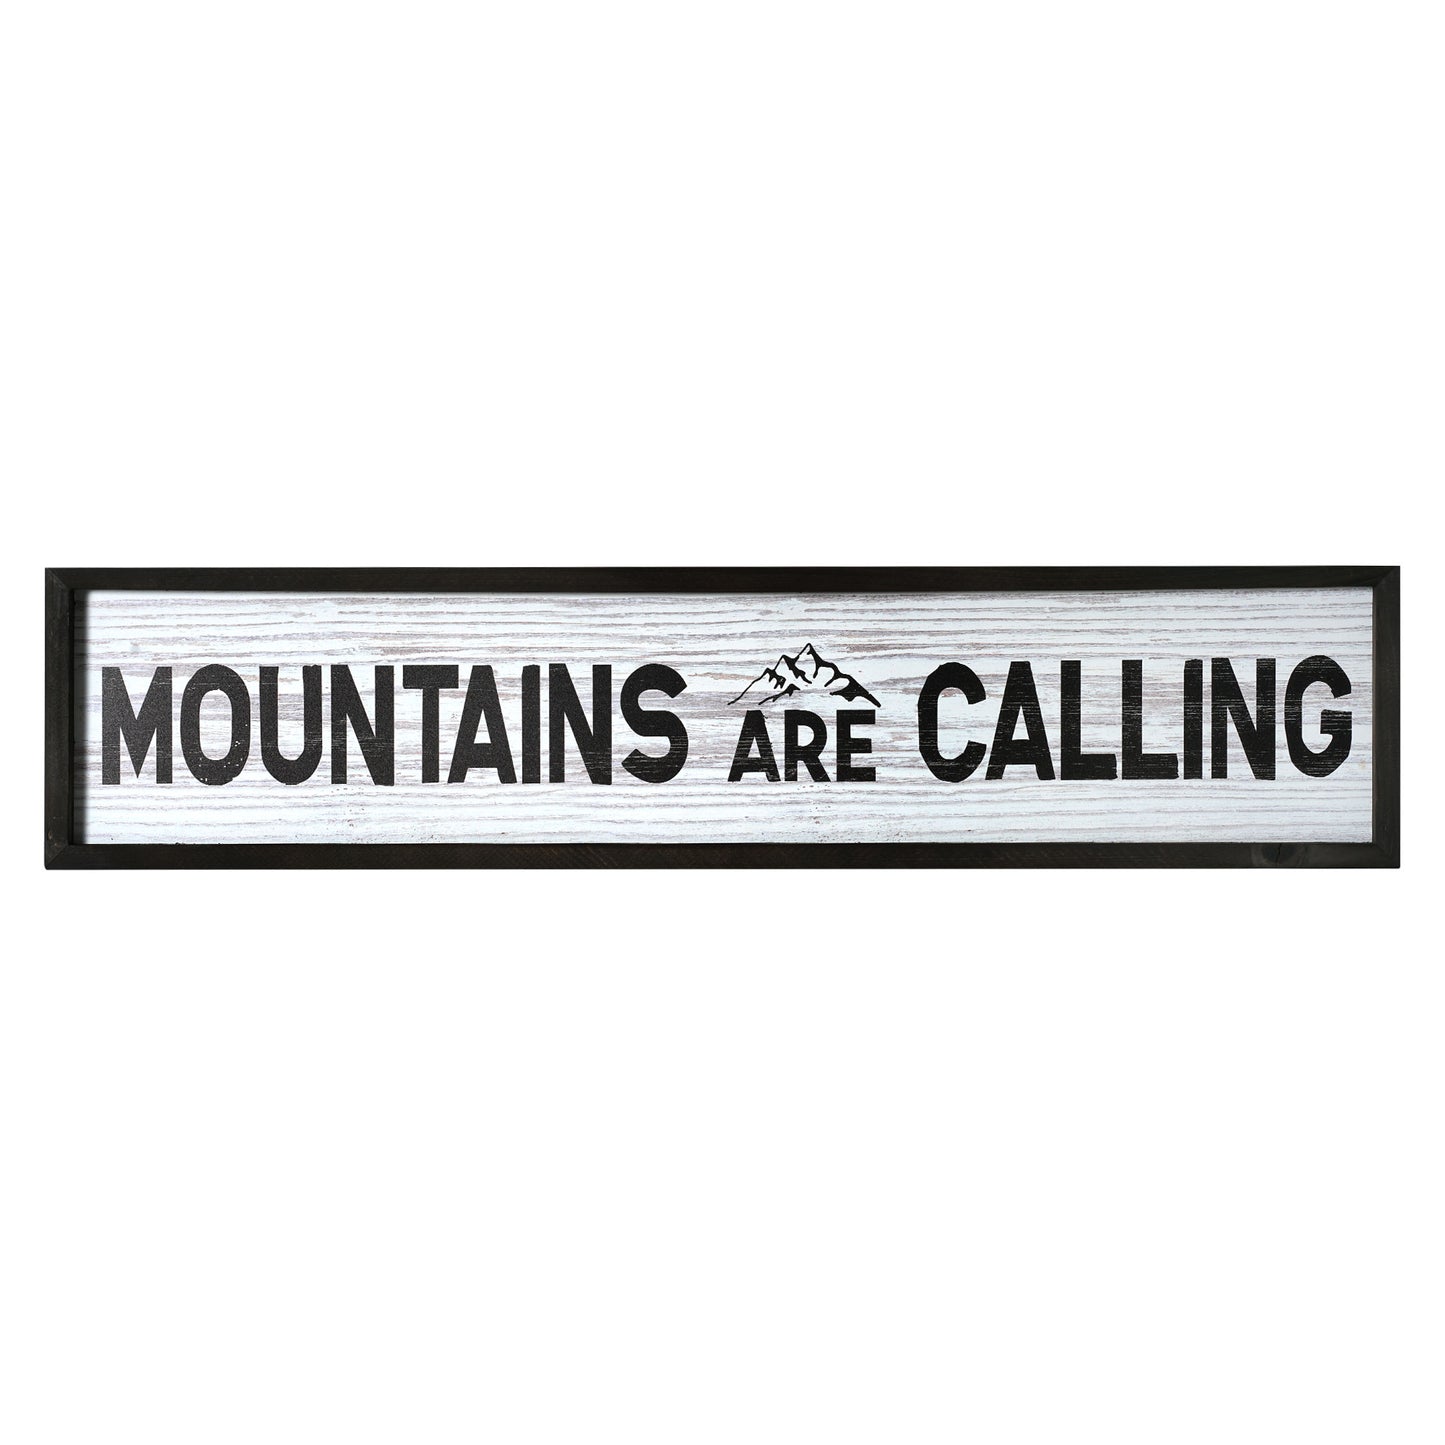 Mountains Are Calling Wood Novelty Wall Sign  - 36" x 8"